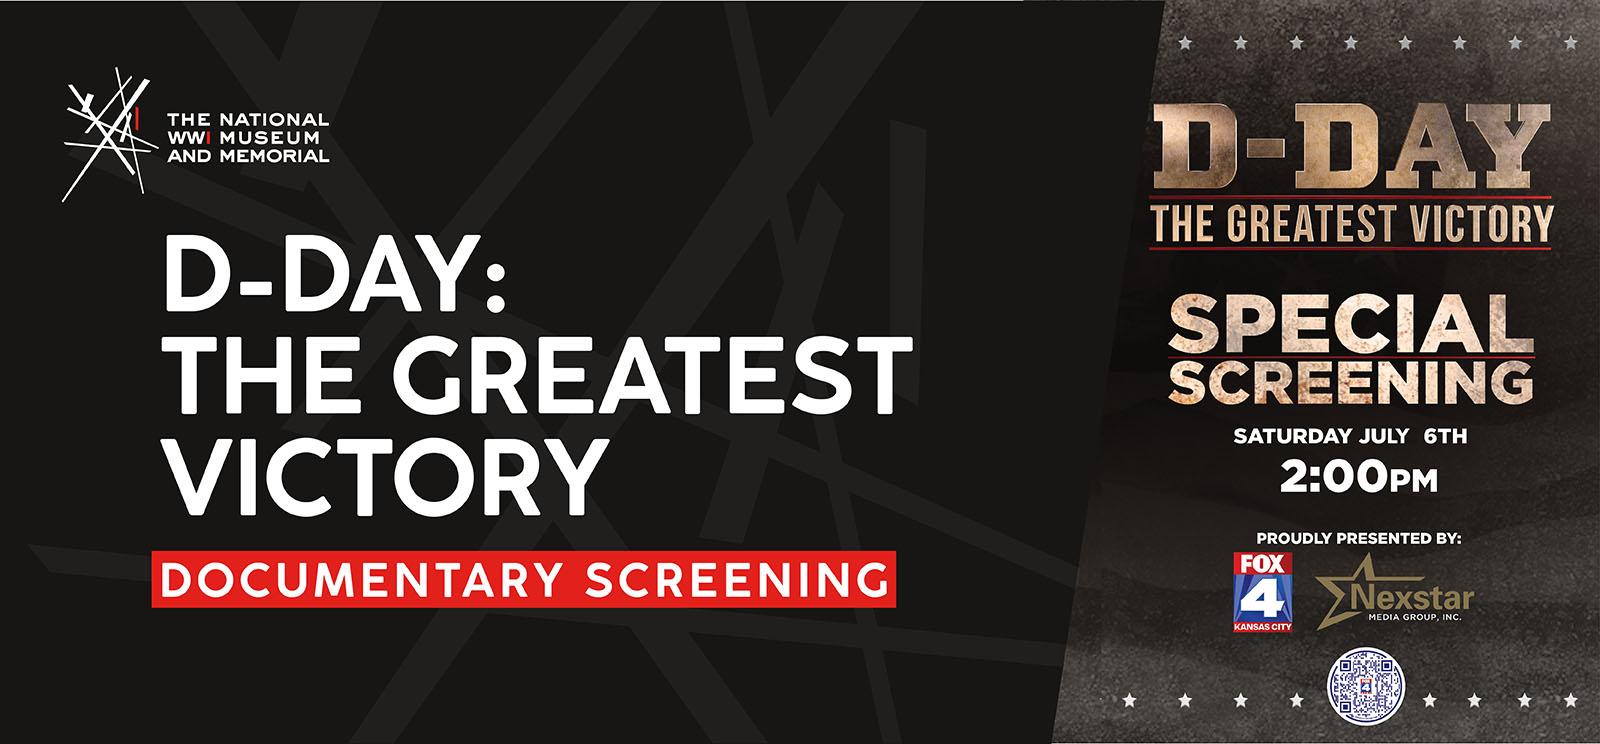 Movie poster: Metallic gold text on a dark smoky background. Text: 'D-Day / The Greatest Victory / Special Screening'